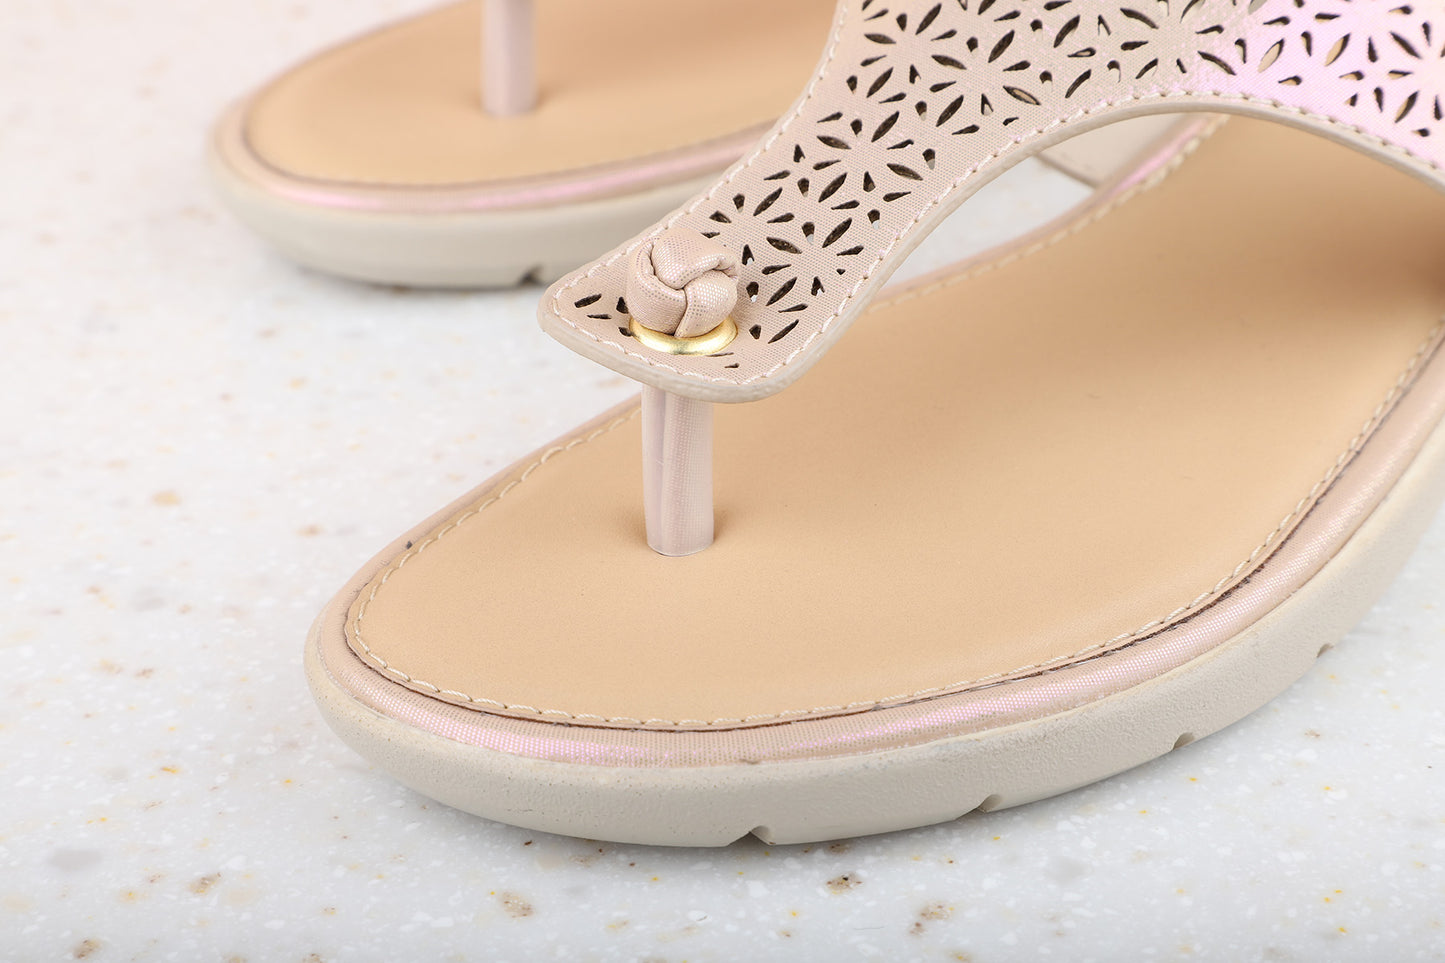 Women Rose Gold Textured T-Strap Flats with Laser Cuts